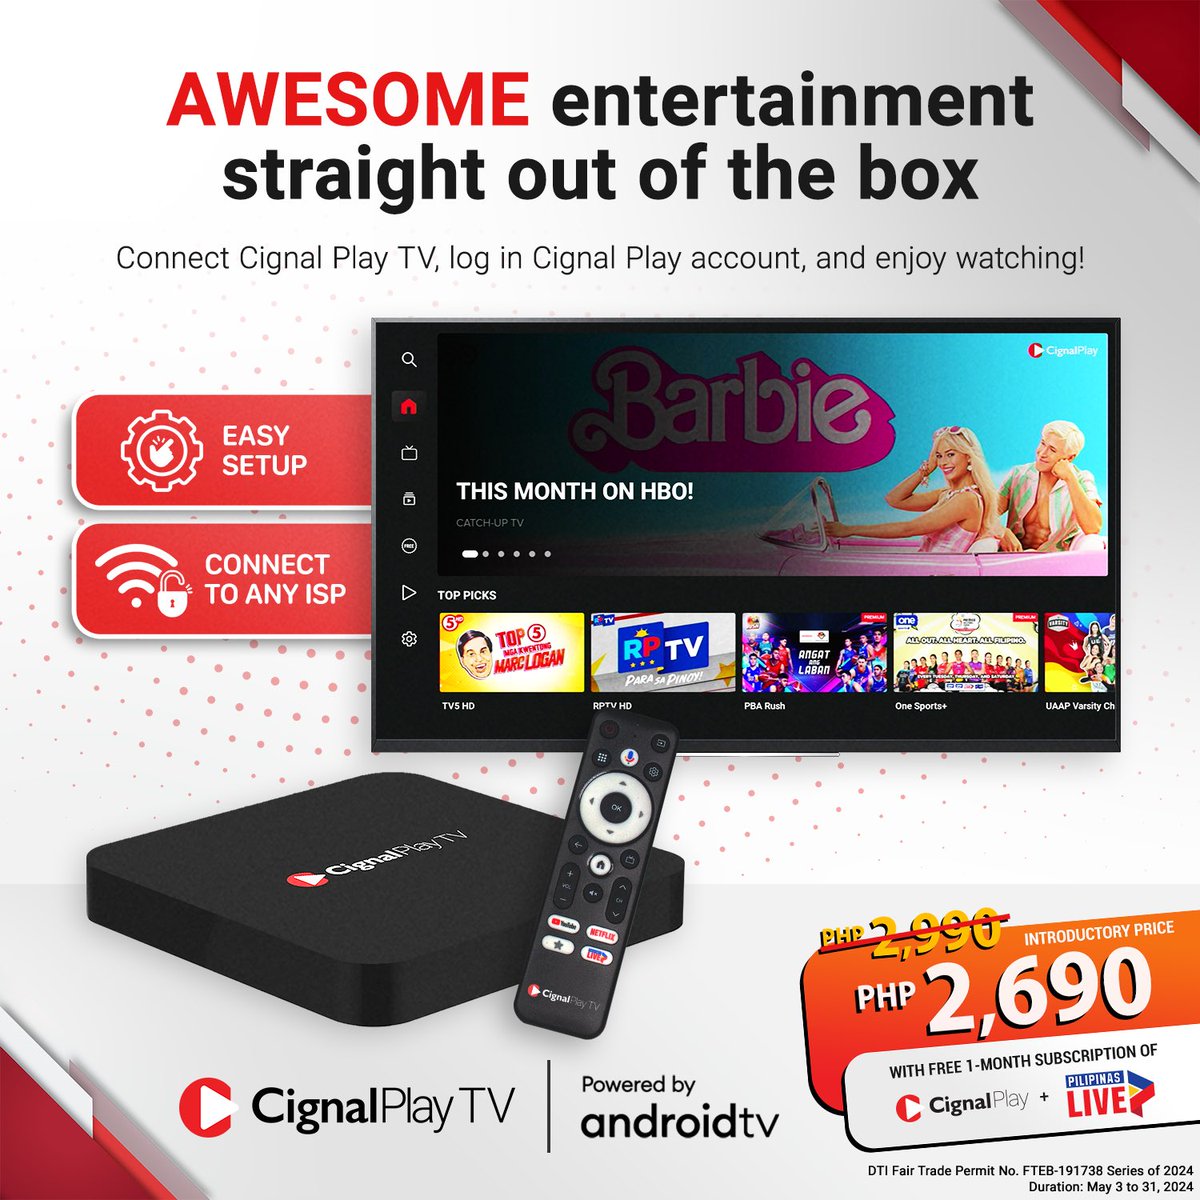 CONNECT, LOG-IN, PLAY!  #PlayingForAll 📺🤩

Meet the all-in-one #CignalPlayTV, the streaming companion for LIVE TV, your favorite apps, and AWESOME Entertainment! 

#TaraSaCplay